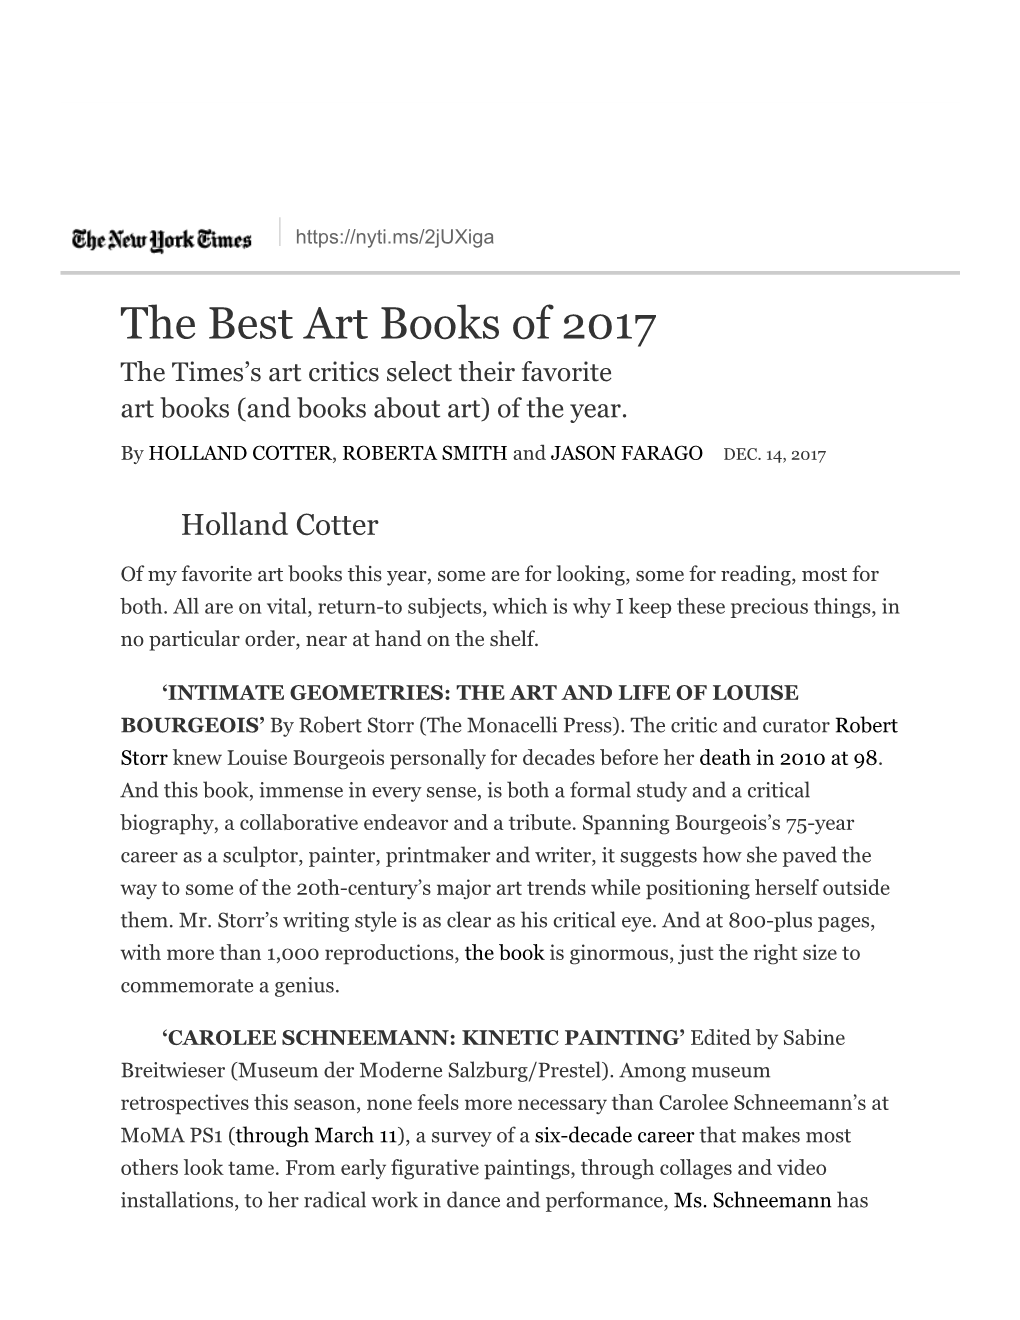 The Best Art Books of 2017 the Times’S Art Critics Select Their Favorite Art Books (And Books About Art) of the Year